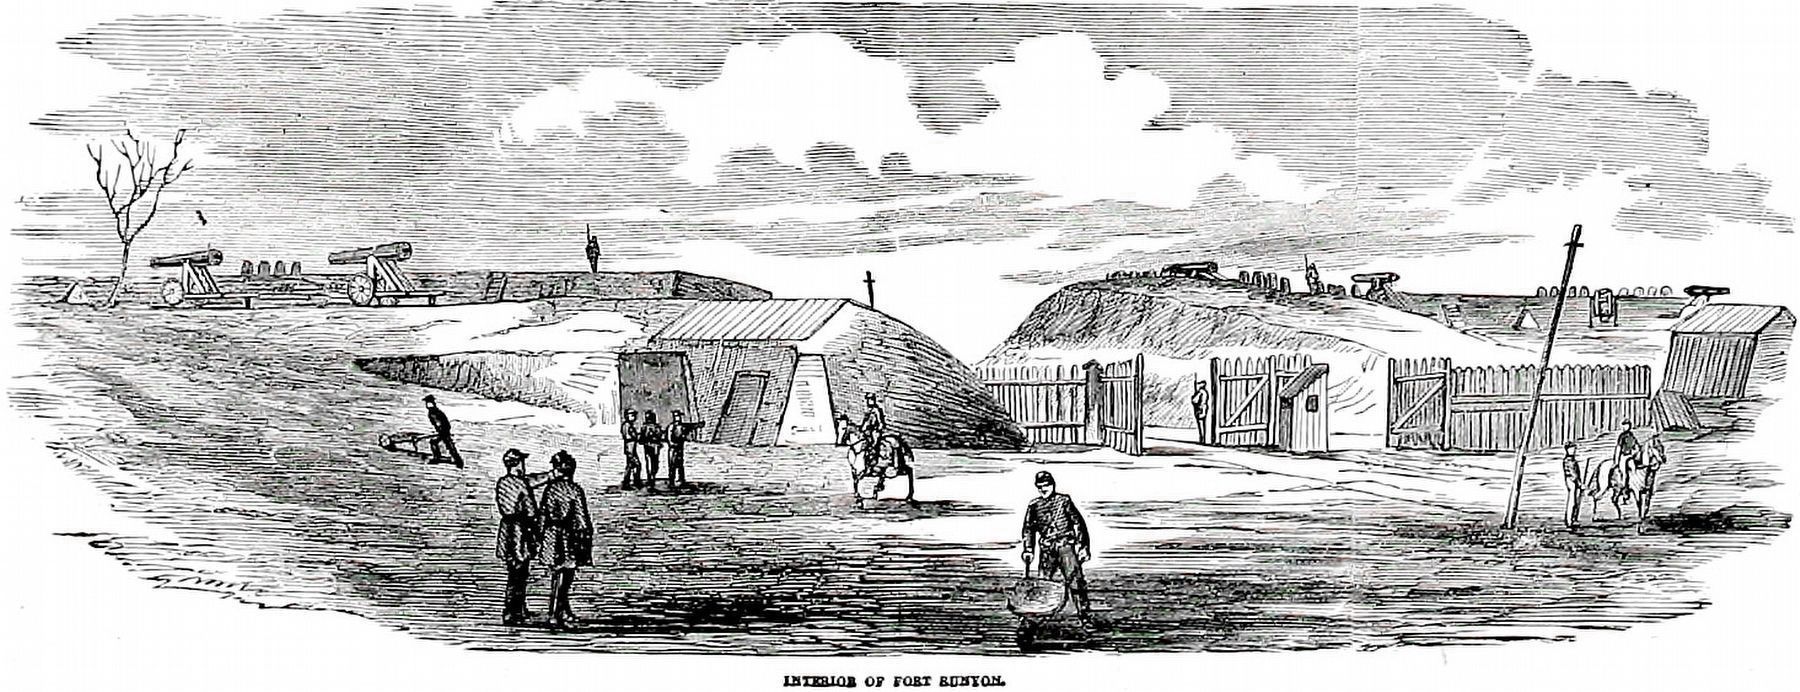 Interior of Fort Runyon, April 1861. image. Click for full size.